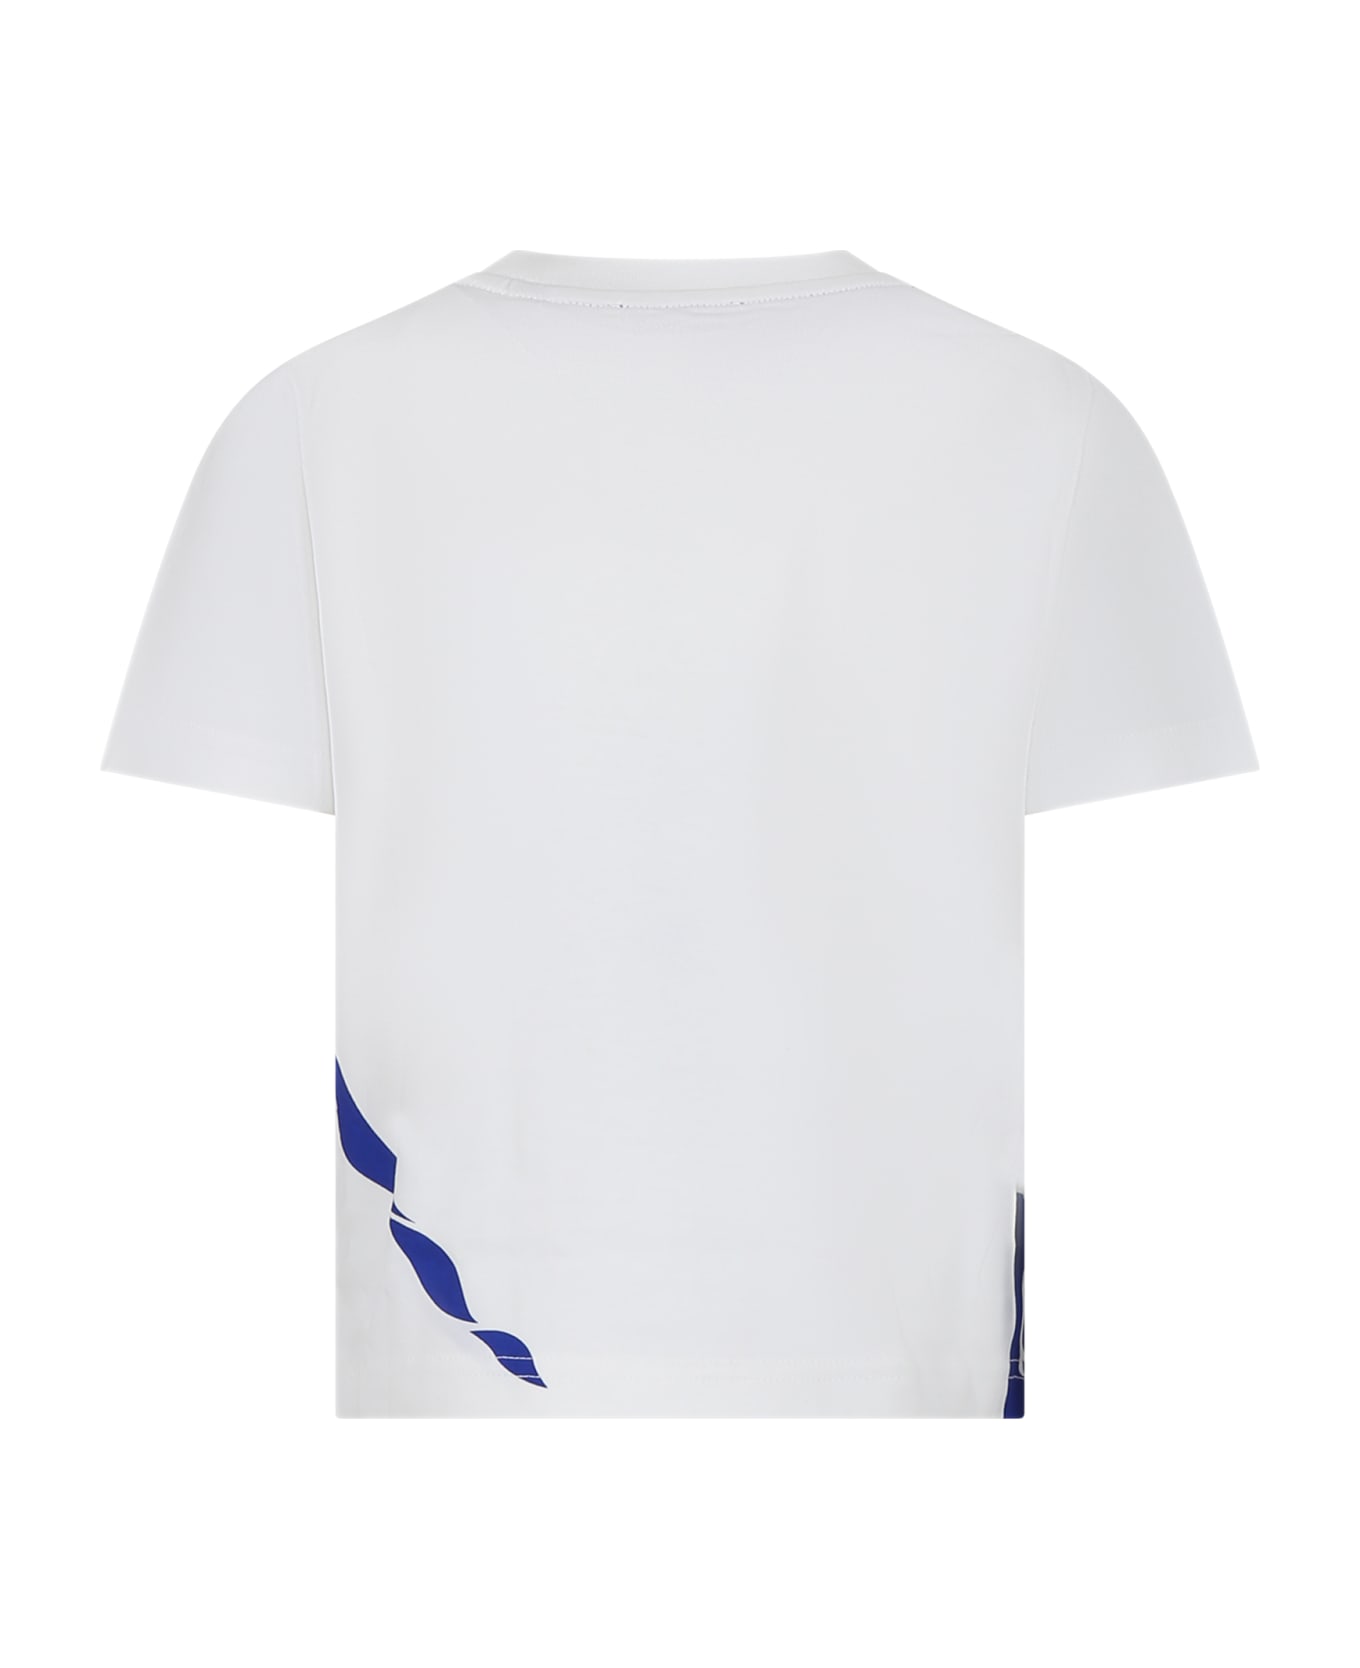 Burberry White T-shirt For Girl With Print - White